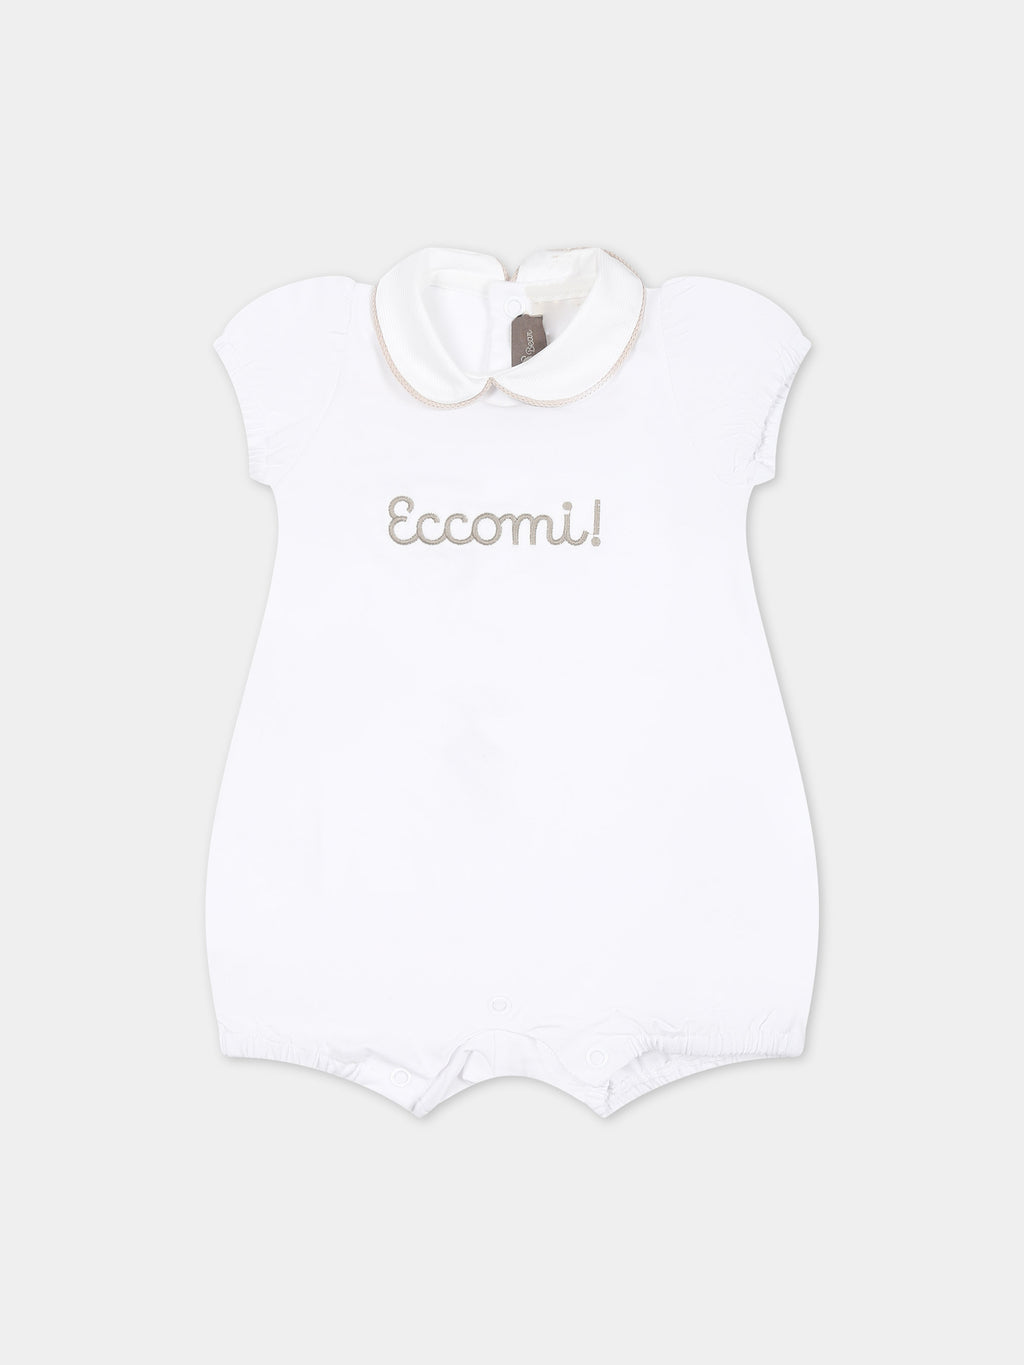 White romper for babykids with writing